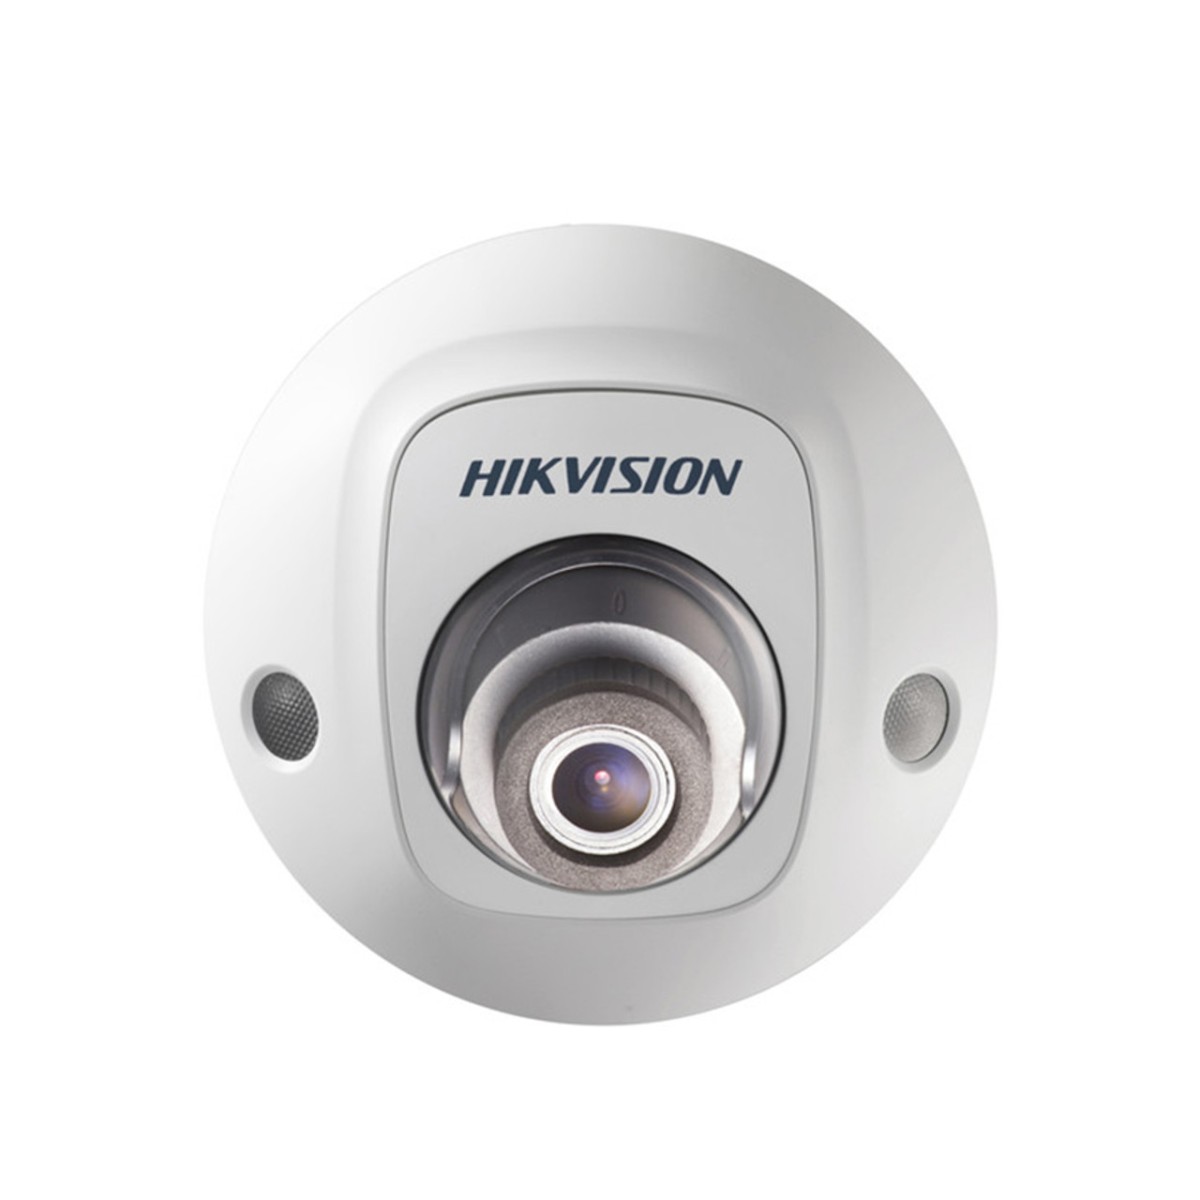 IP-камера Hikvision DS-2CD2545FWD-I 98_98.jpg - фото 2